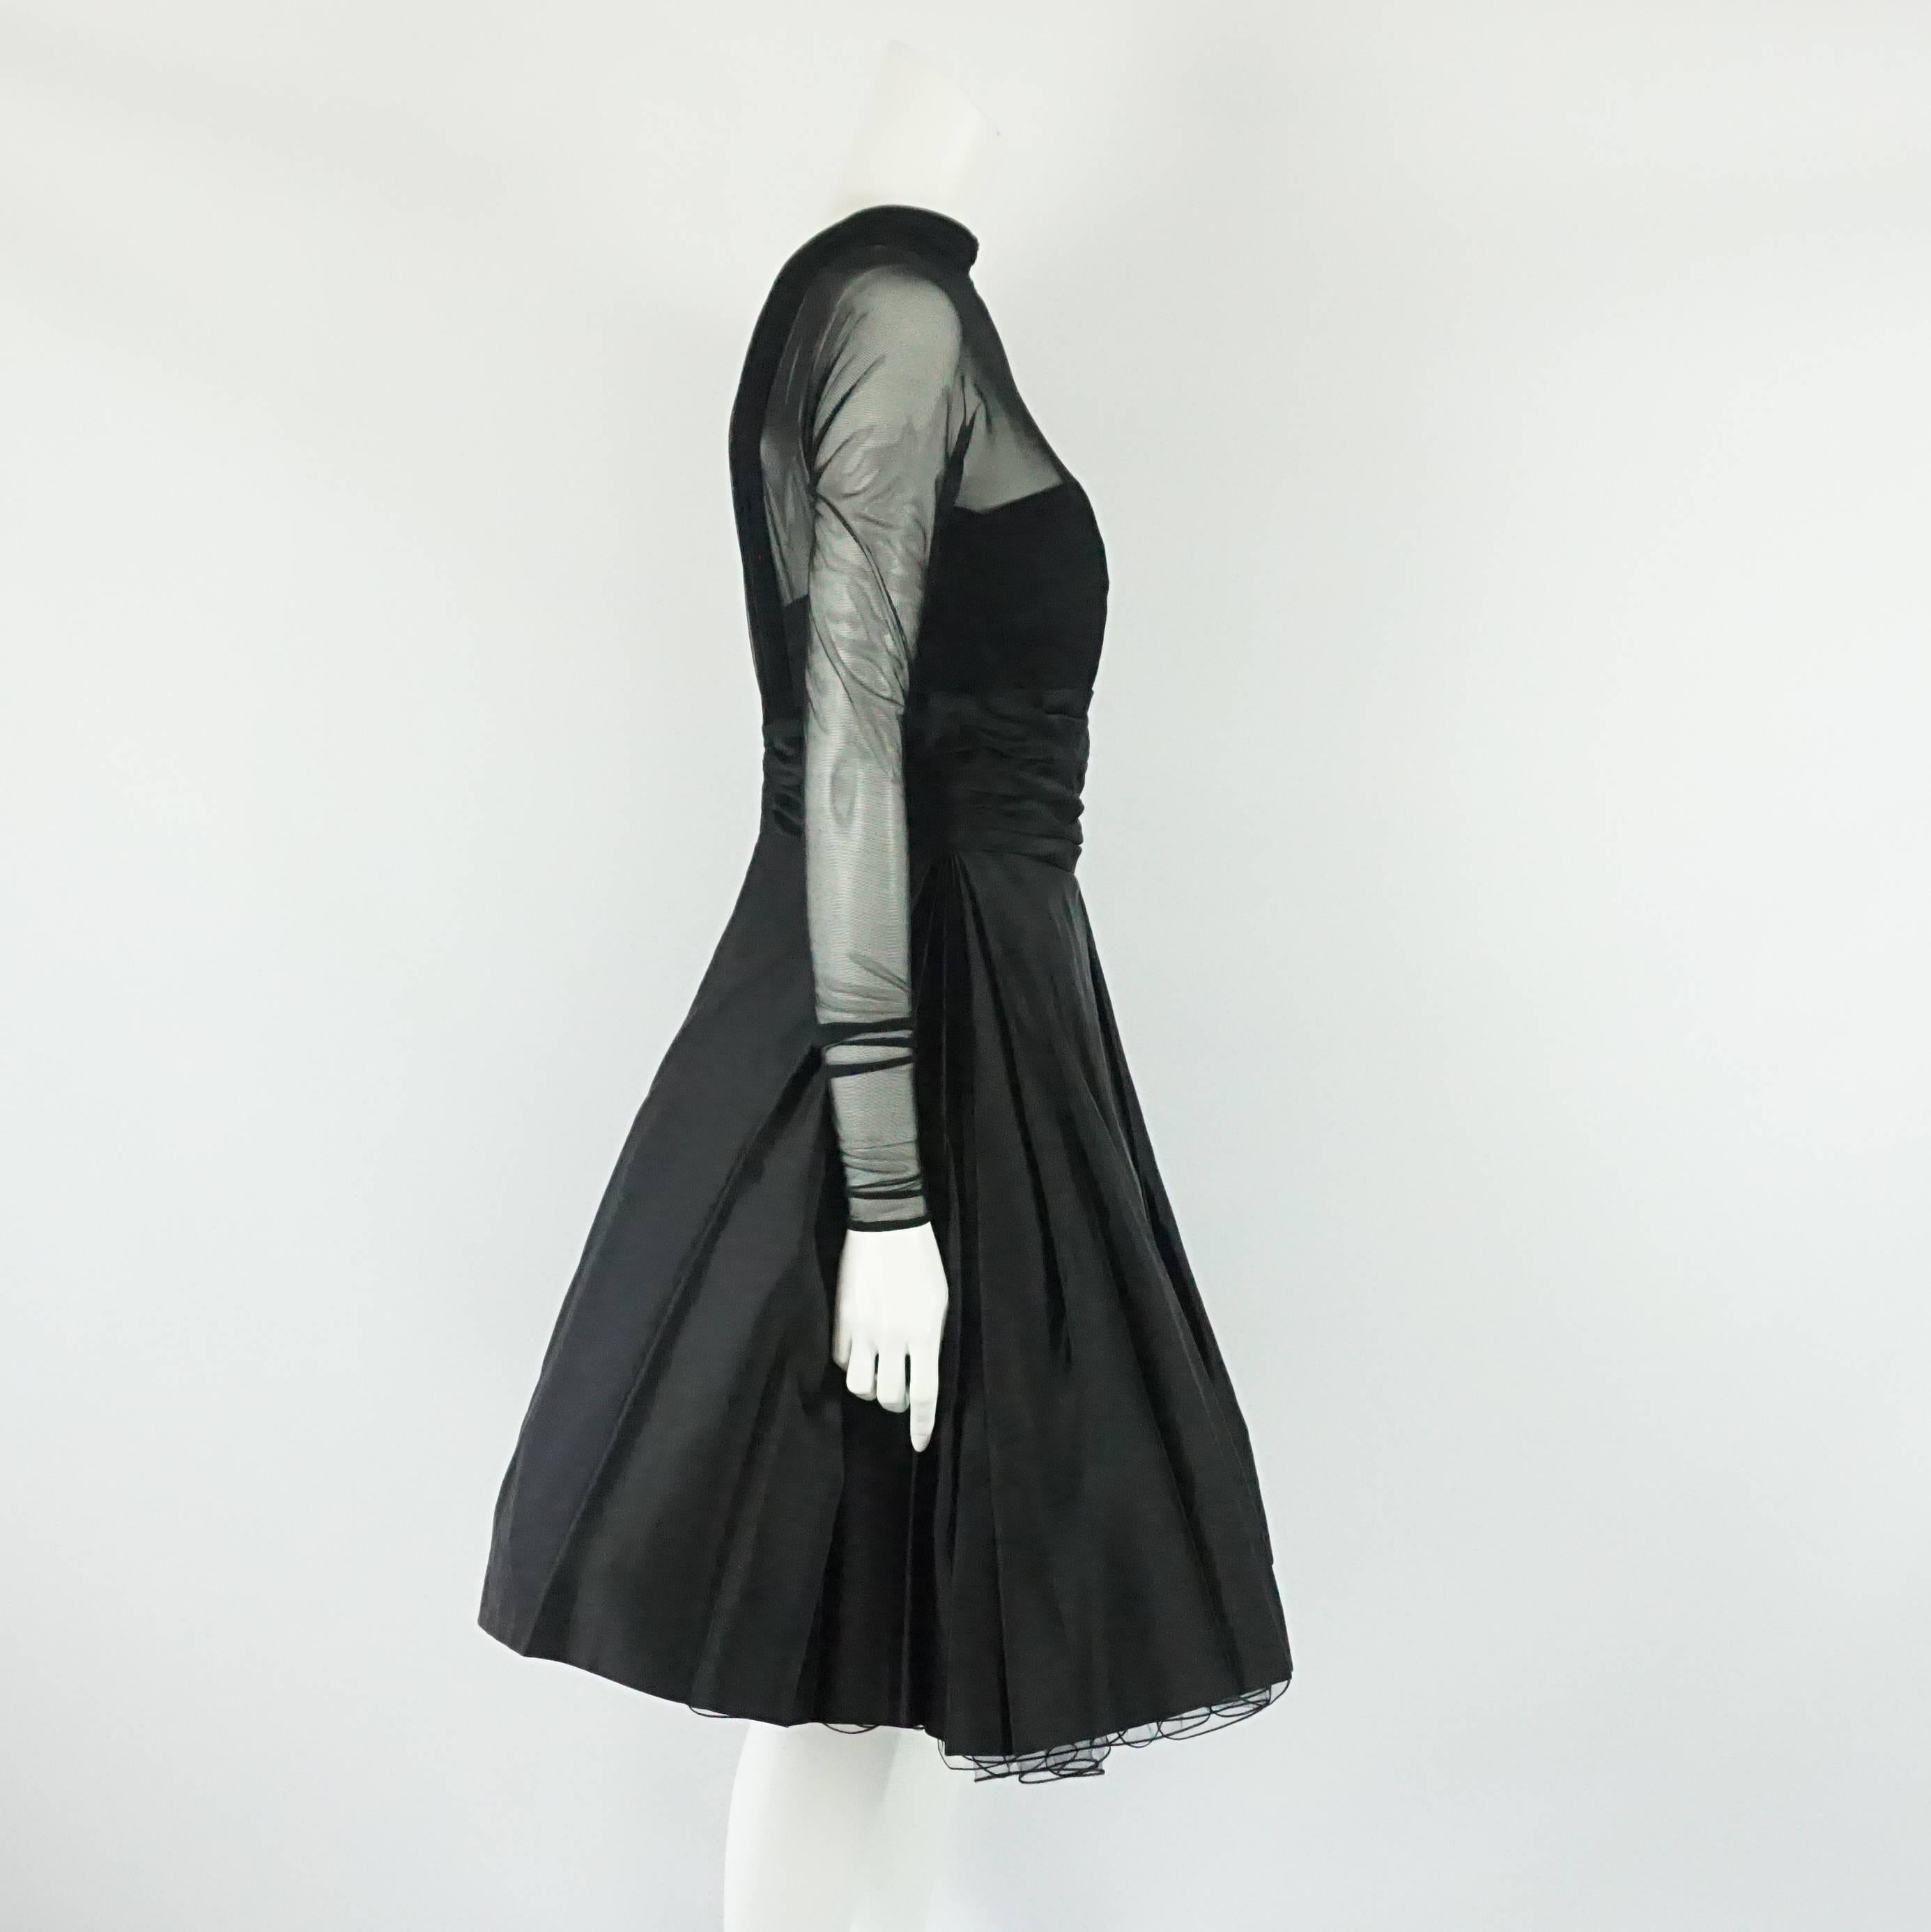 Vicky Tiel Couture Black Mesh and Acetate Evening Dress - 42 - Circa 80's This elegant and classy black vintage dress is fitted to the waist with a sweetheart neck acetate underskirt section and a top mesh long sleeve layer along the top of the